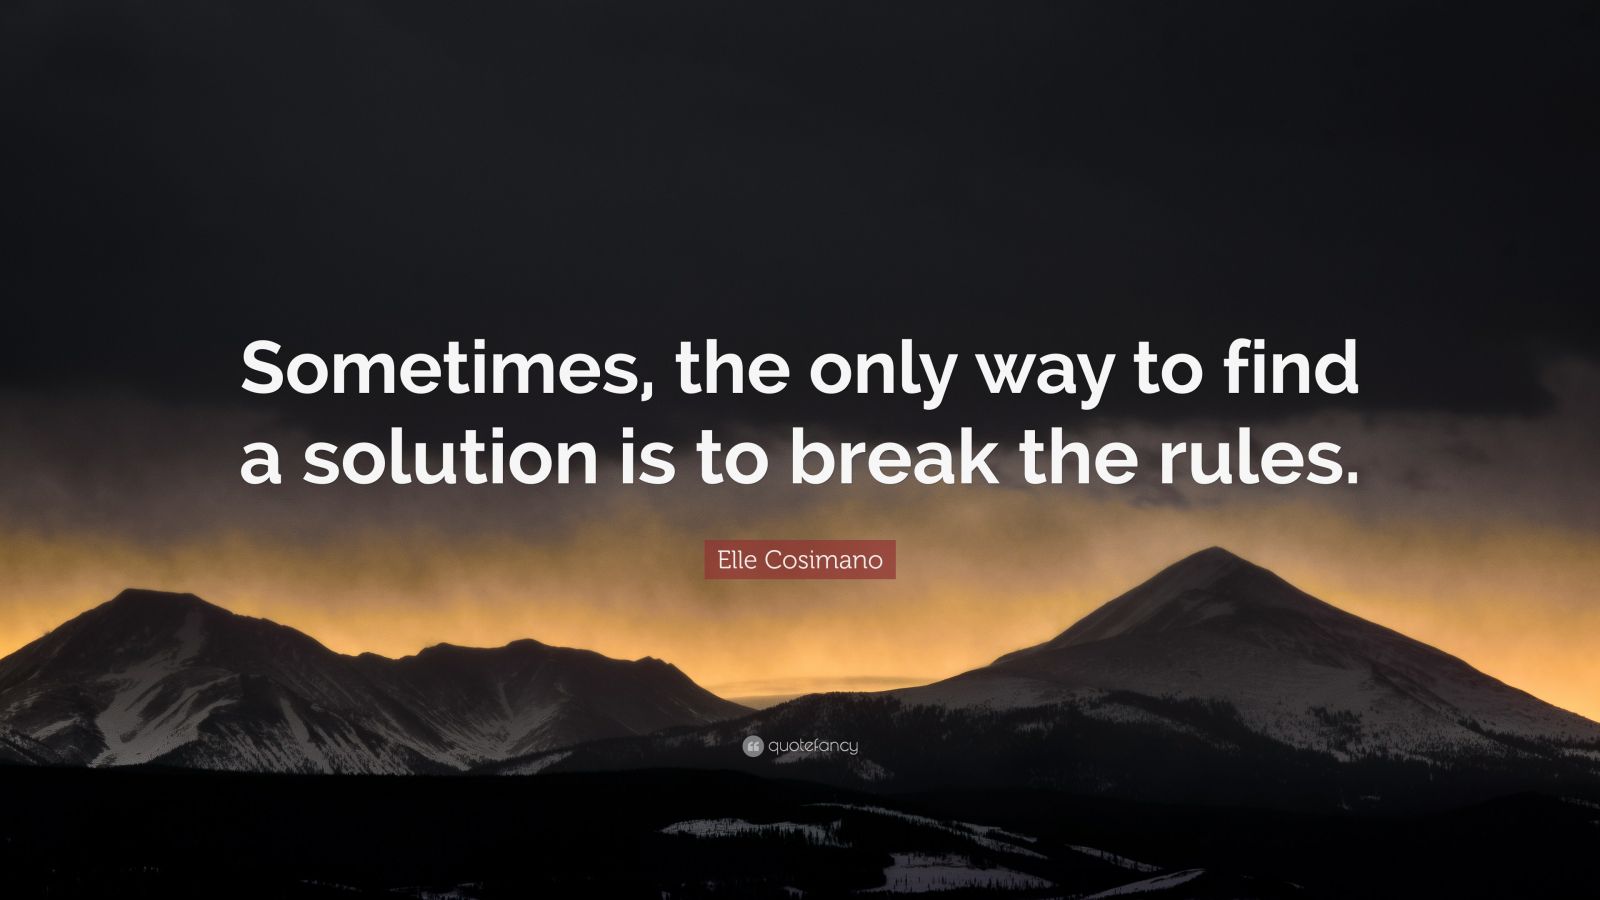 Elle Cosimano Quote: “Sometimes, the only way to find a solution is to ...